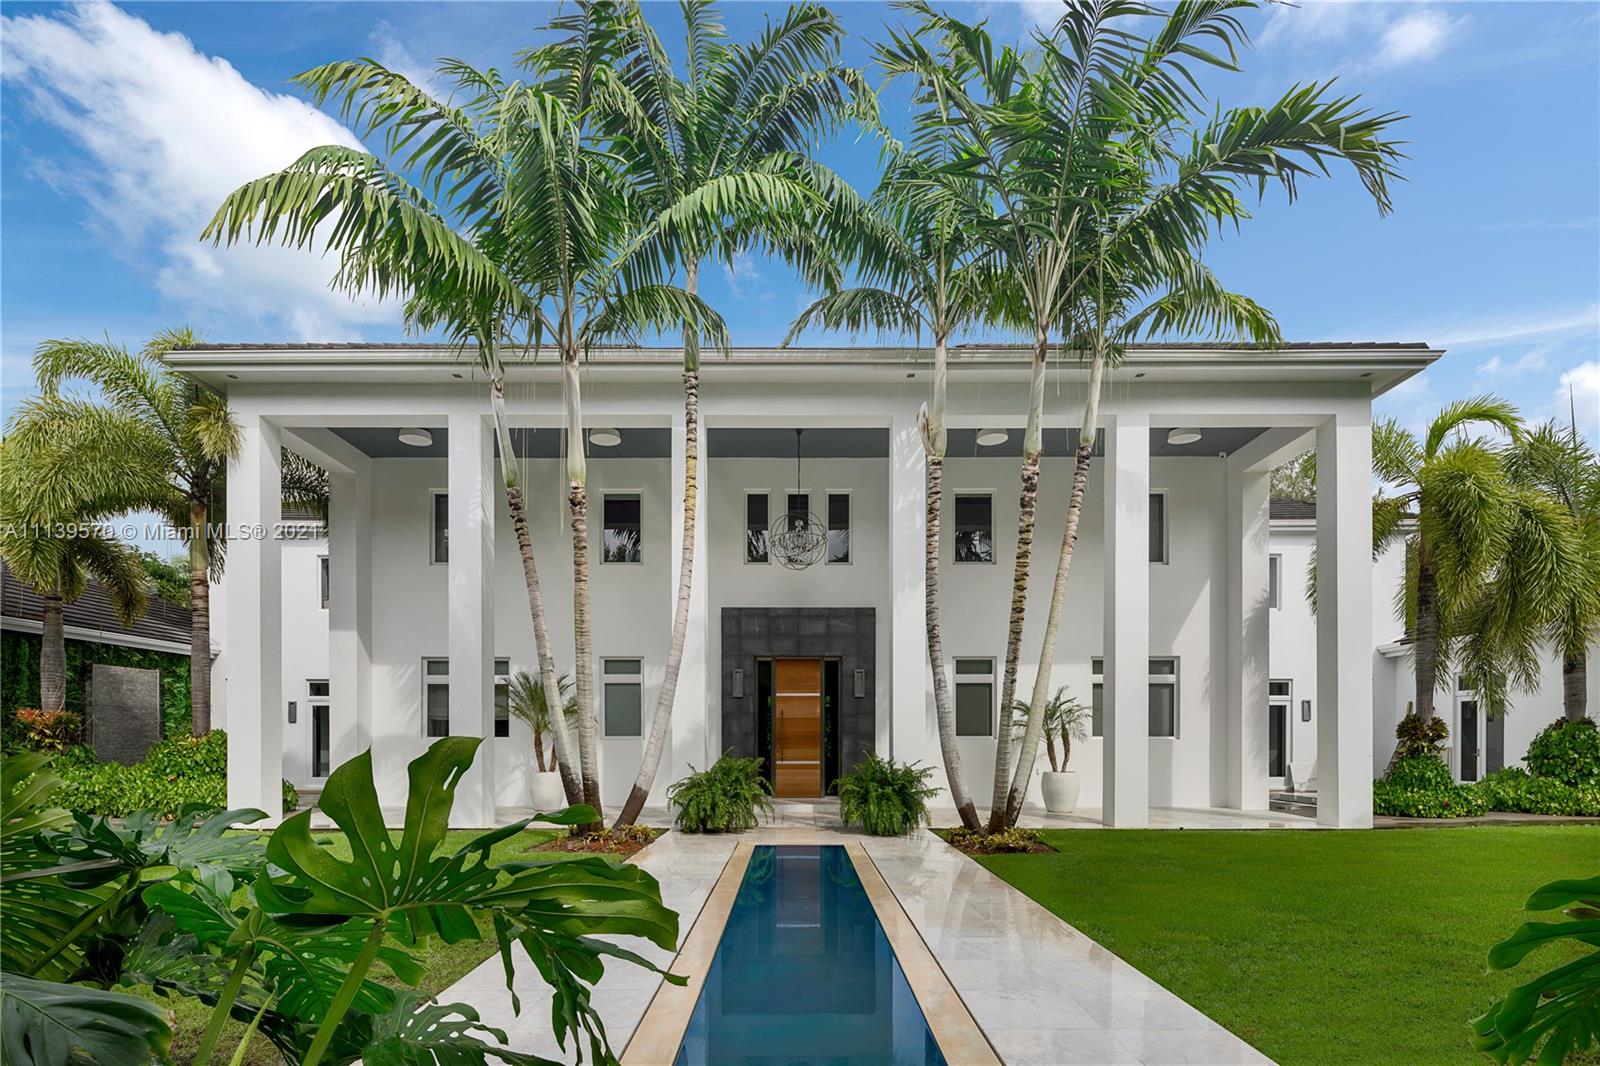 Nestled on an acre lot, this custom 2-story estate is located on a quiet cul-de-sac in one of Miami’s most prestigious neighborhoods, Ponce Davis. Guests are welcomed by a stunning reflection pool and double height foyer with winding staircase. Massive Master Suite boasts sitting area, private balcony, impressive custom closet, spacious bathroom with oversized shower and separate tub. Modern Kitchen with eat-in island and high-end appliances. Luxurious dining room with wine cellar and formal living room. Completely gated with lush landscaping, Koi Pond, multiple courtyards and water features create an ultimate private enclave. Multiple balconies and covered patio overlook the infinity edge pool. Additional features include media room, office, elevator and 6 car garage.